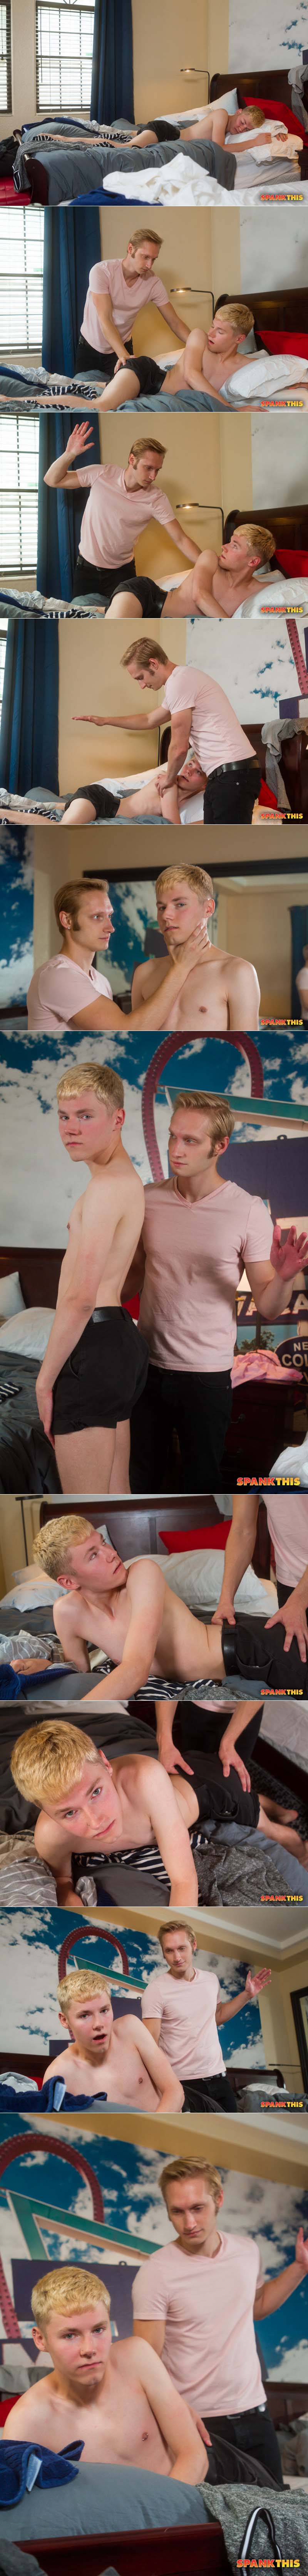 Blond Booty (Max Carter Spanks Bryce Foster) at SpankThis!